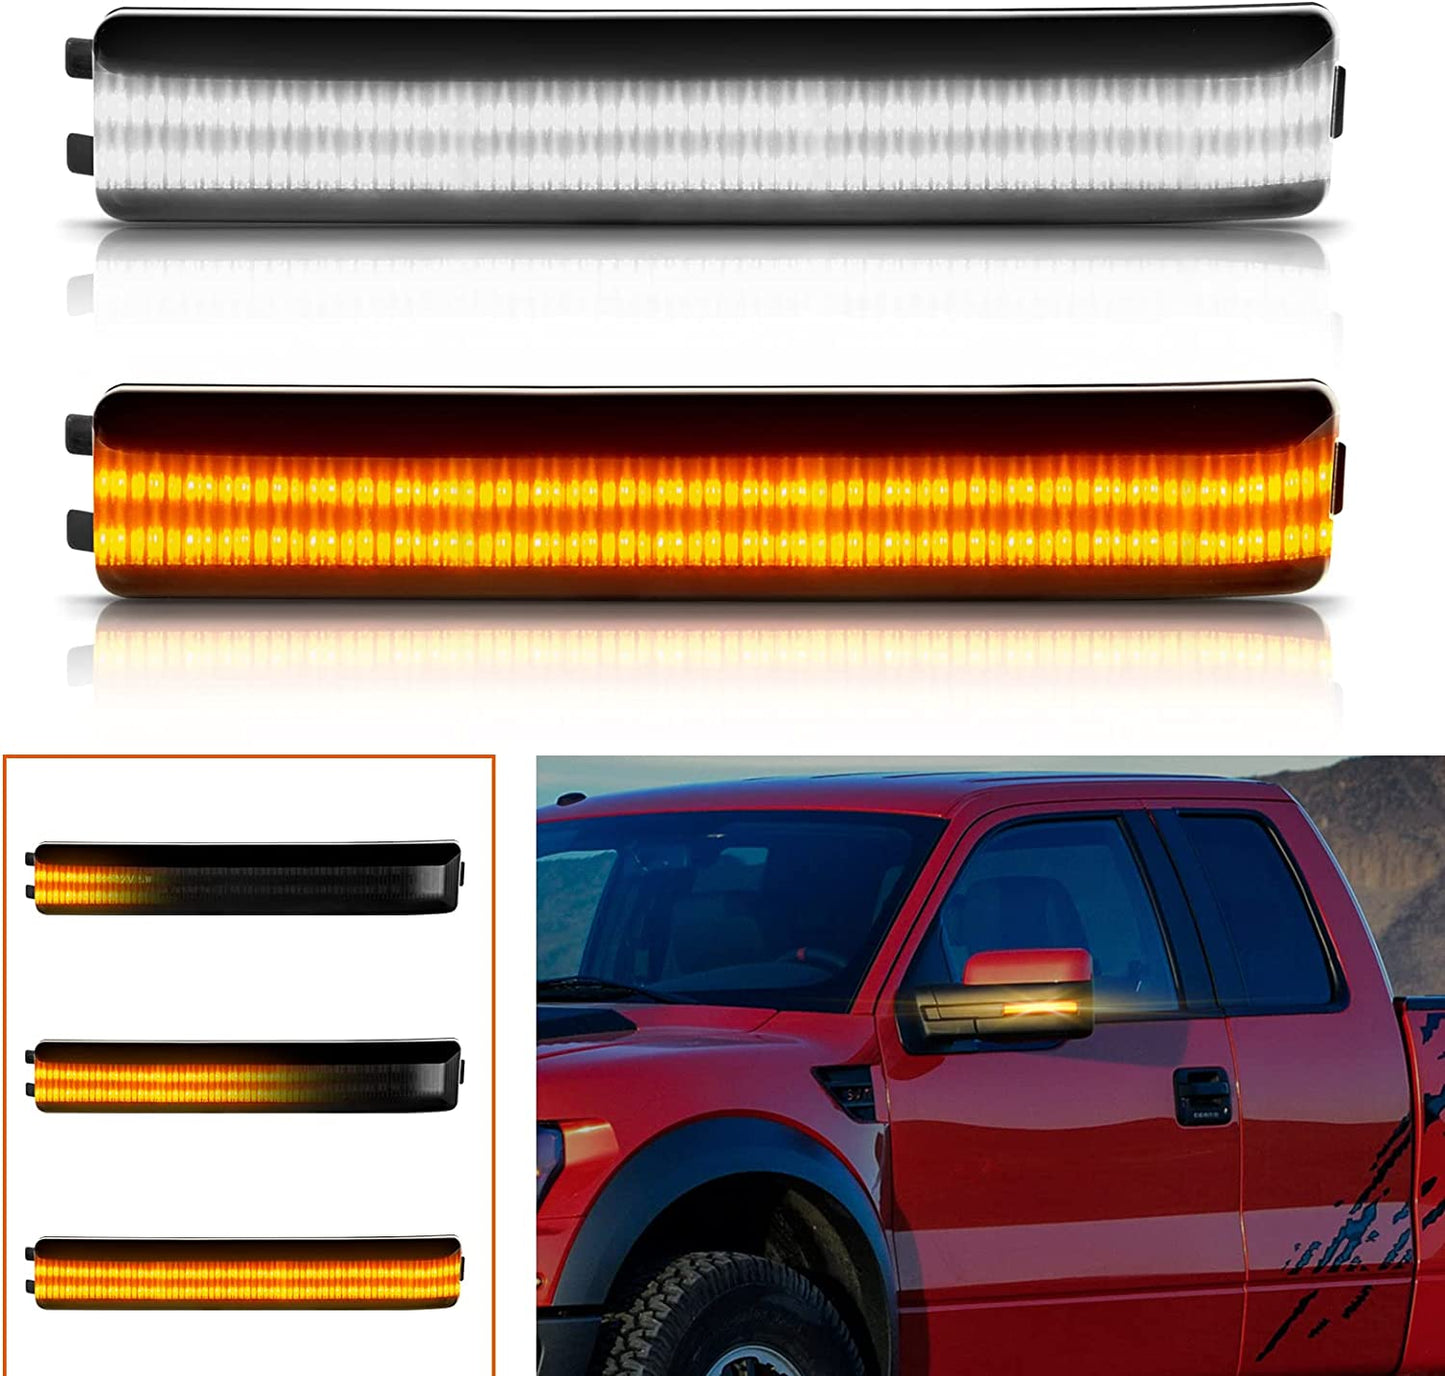 LED Sequential Side Mirror Reflector Lights for 2009-2014 Ford F150, Smoked Lens